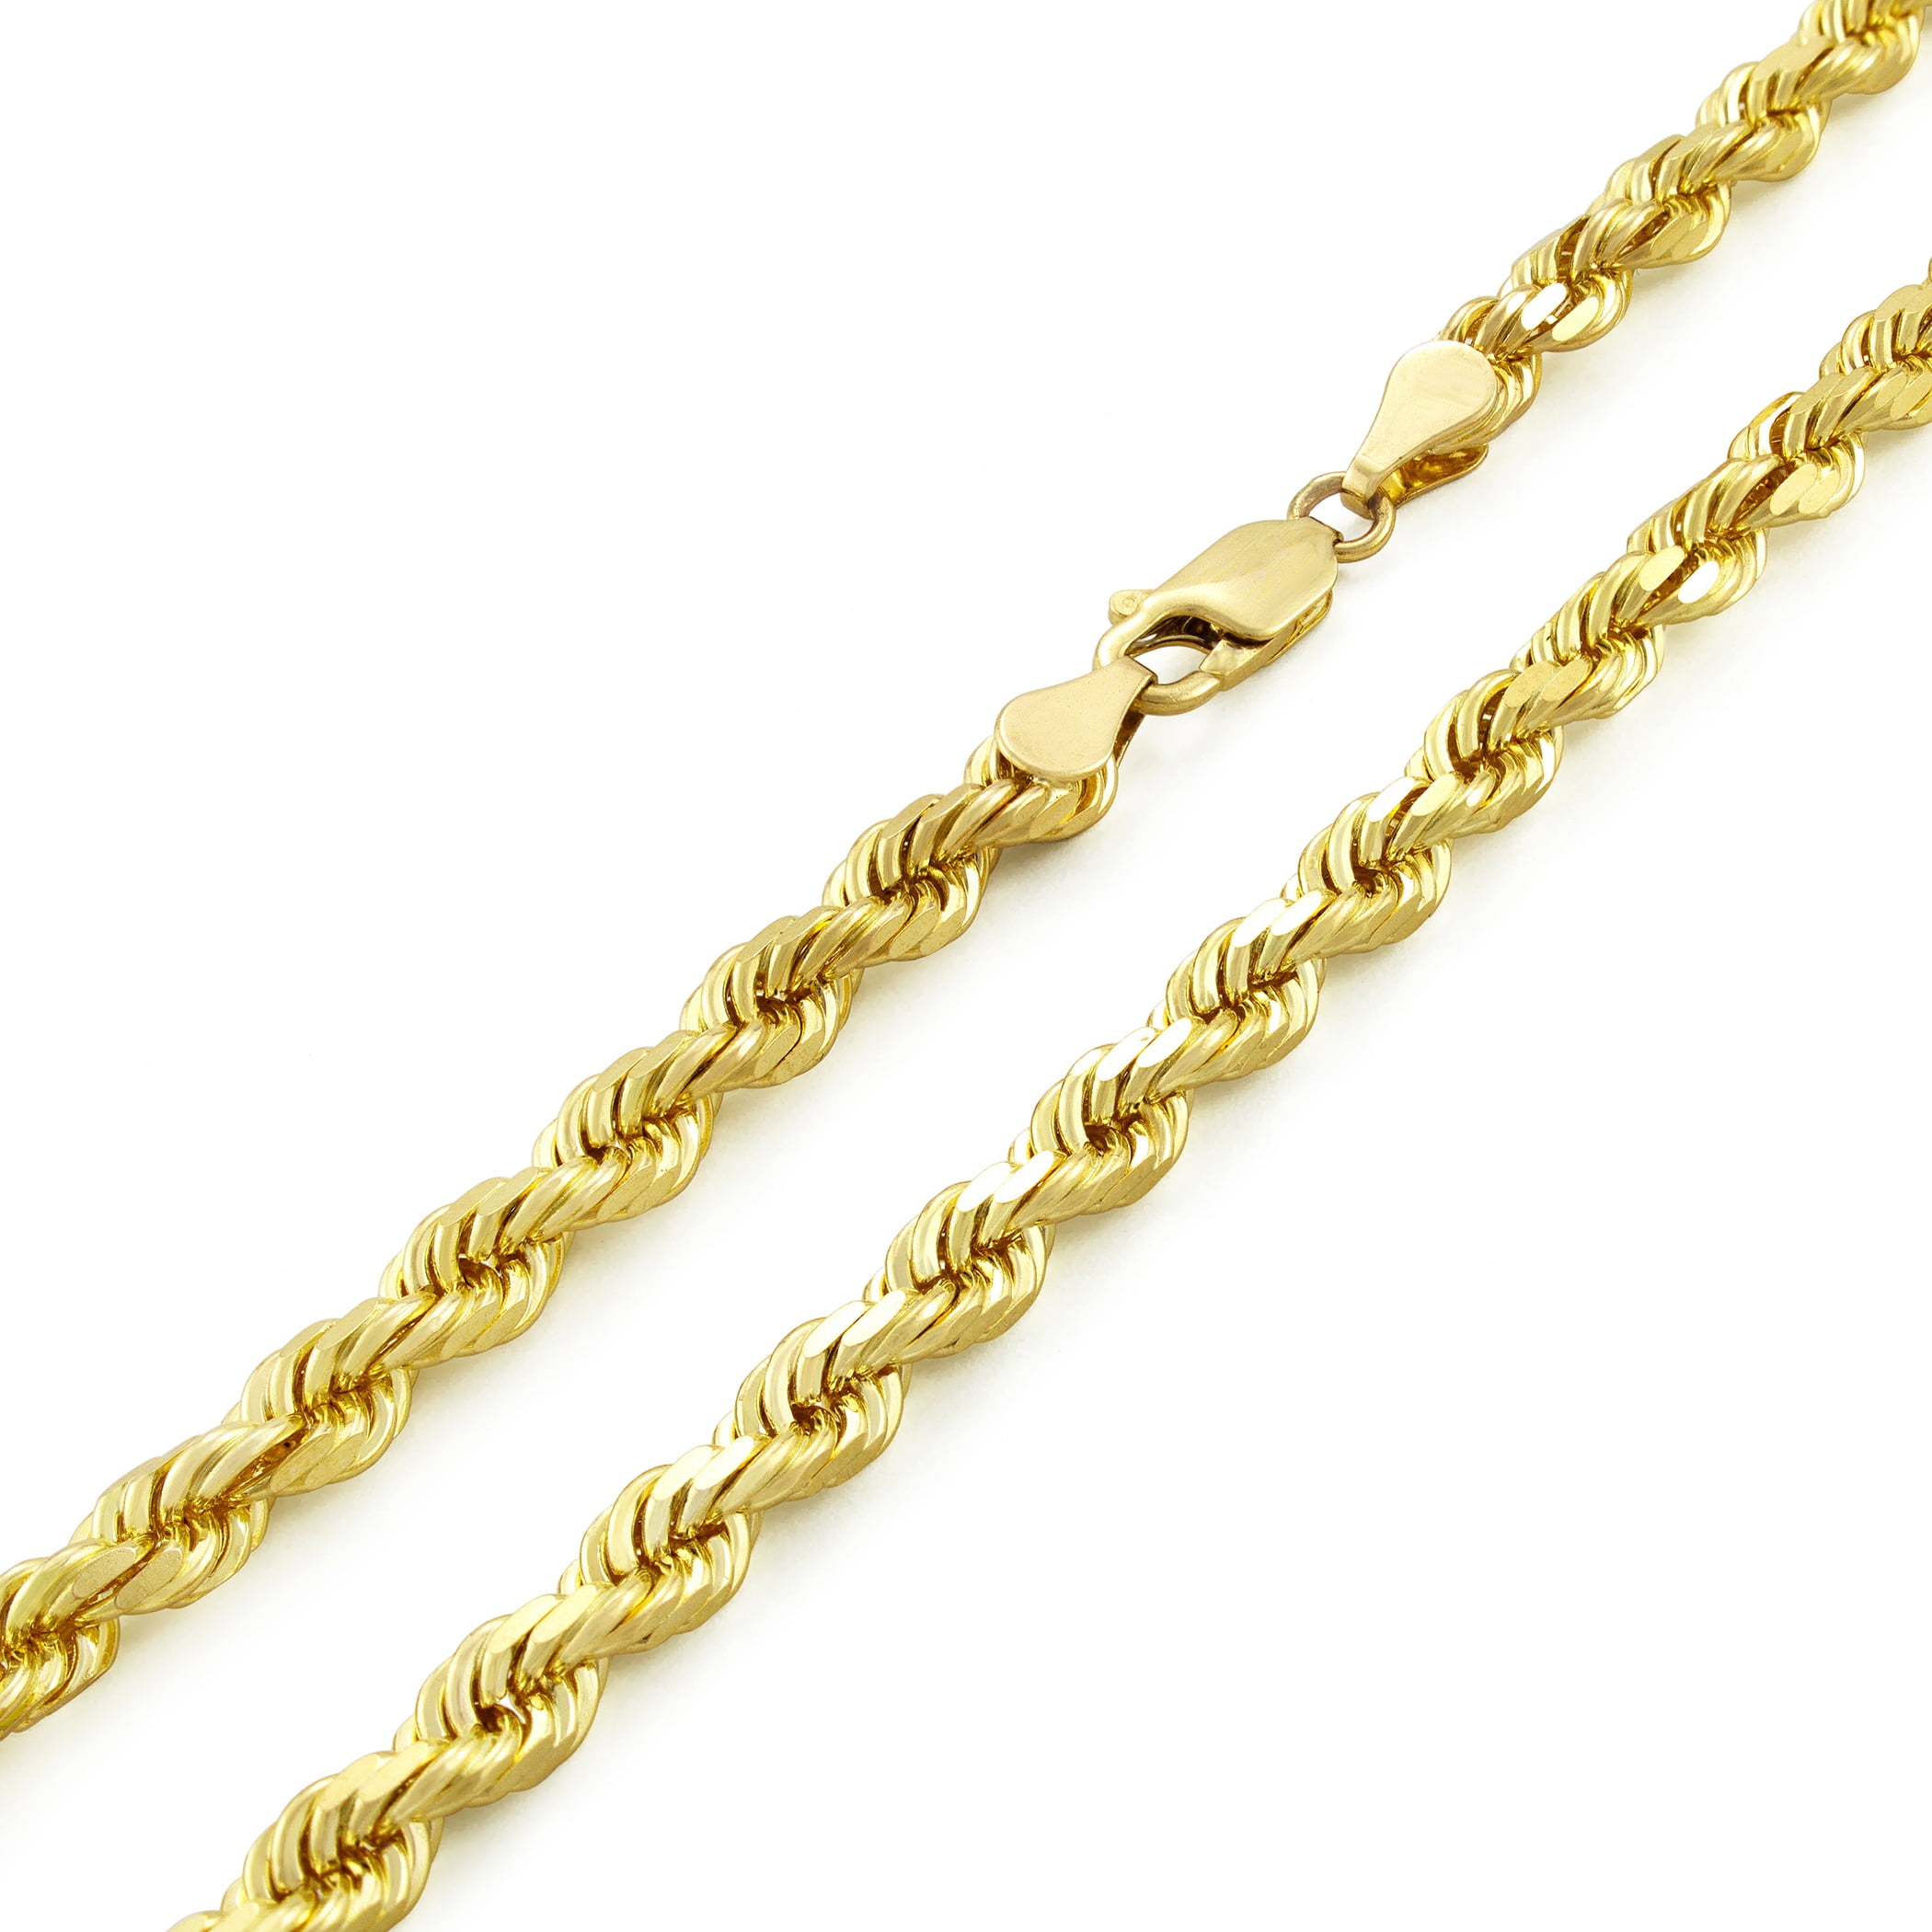 20 inch 14kt Gold Light Rope Chain 